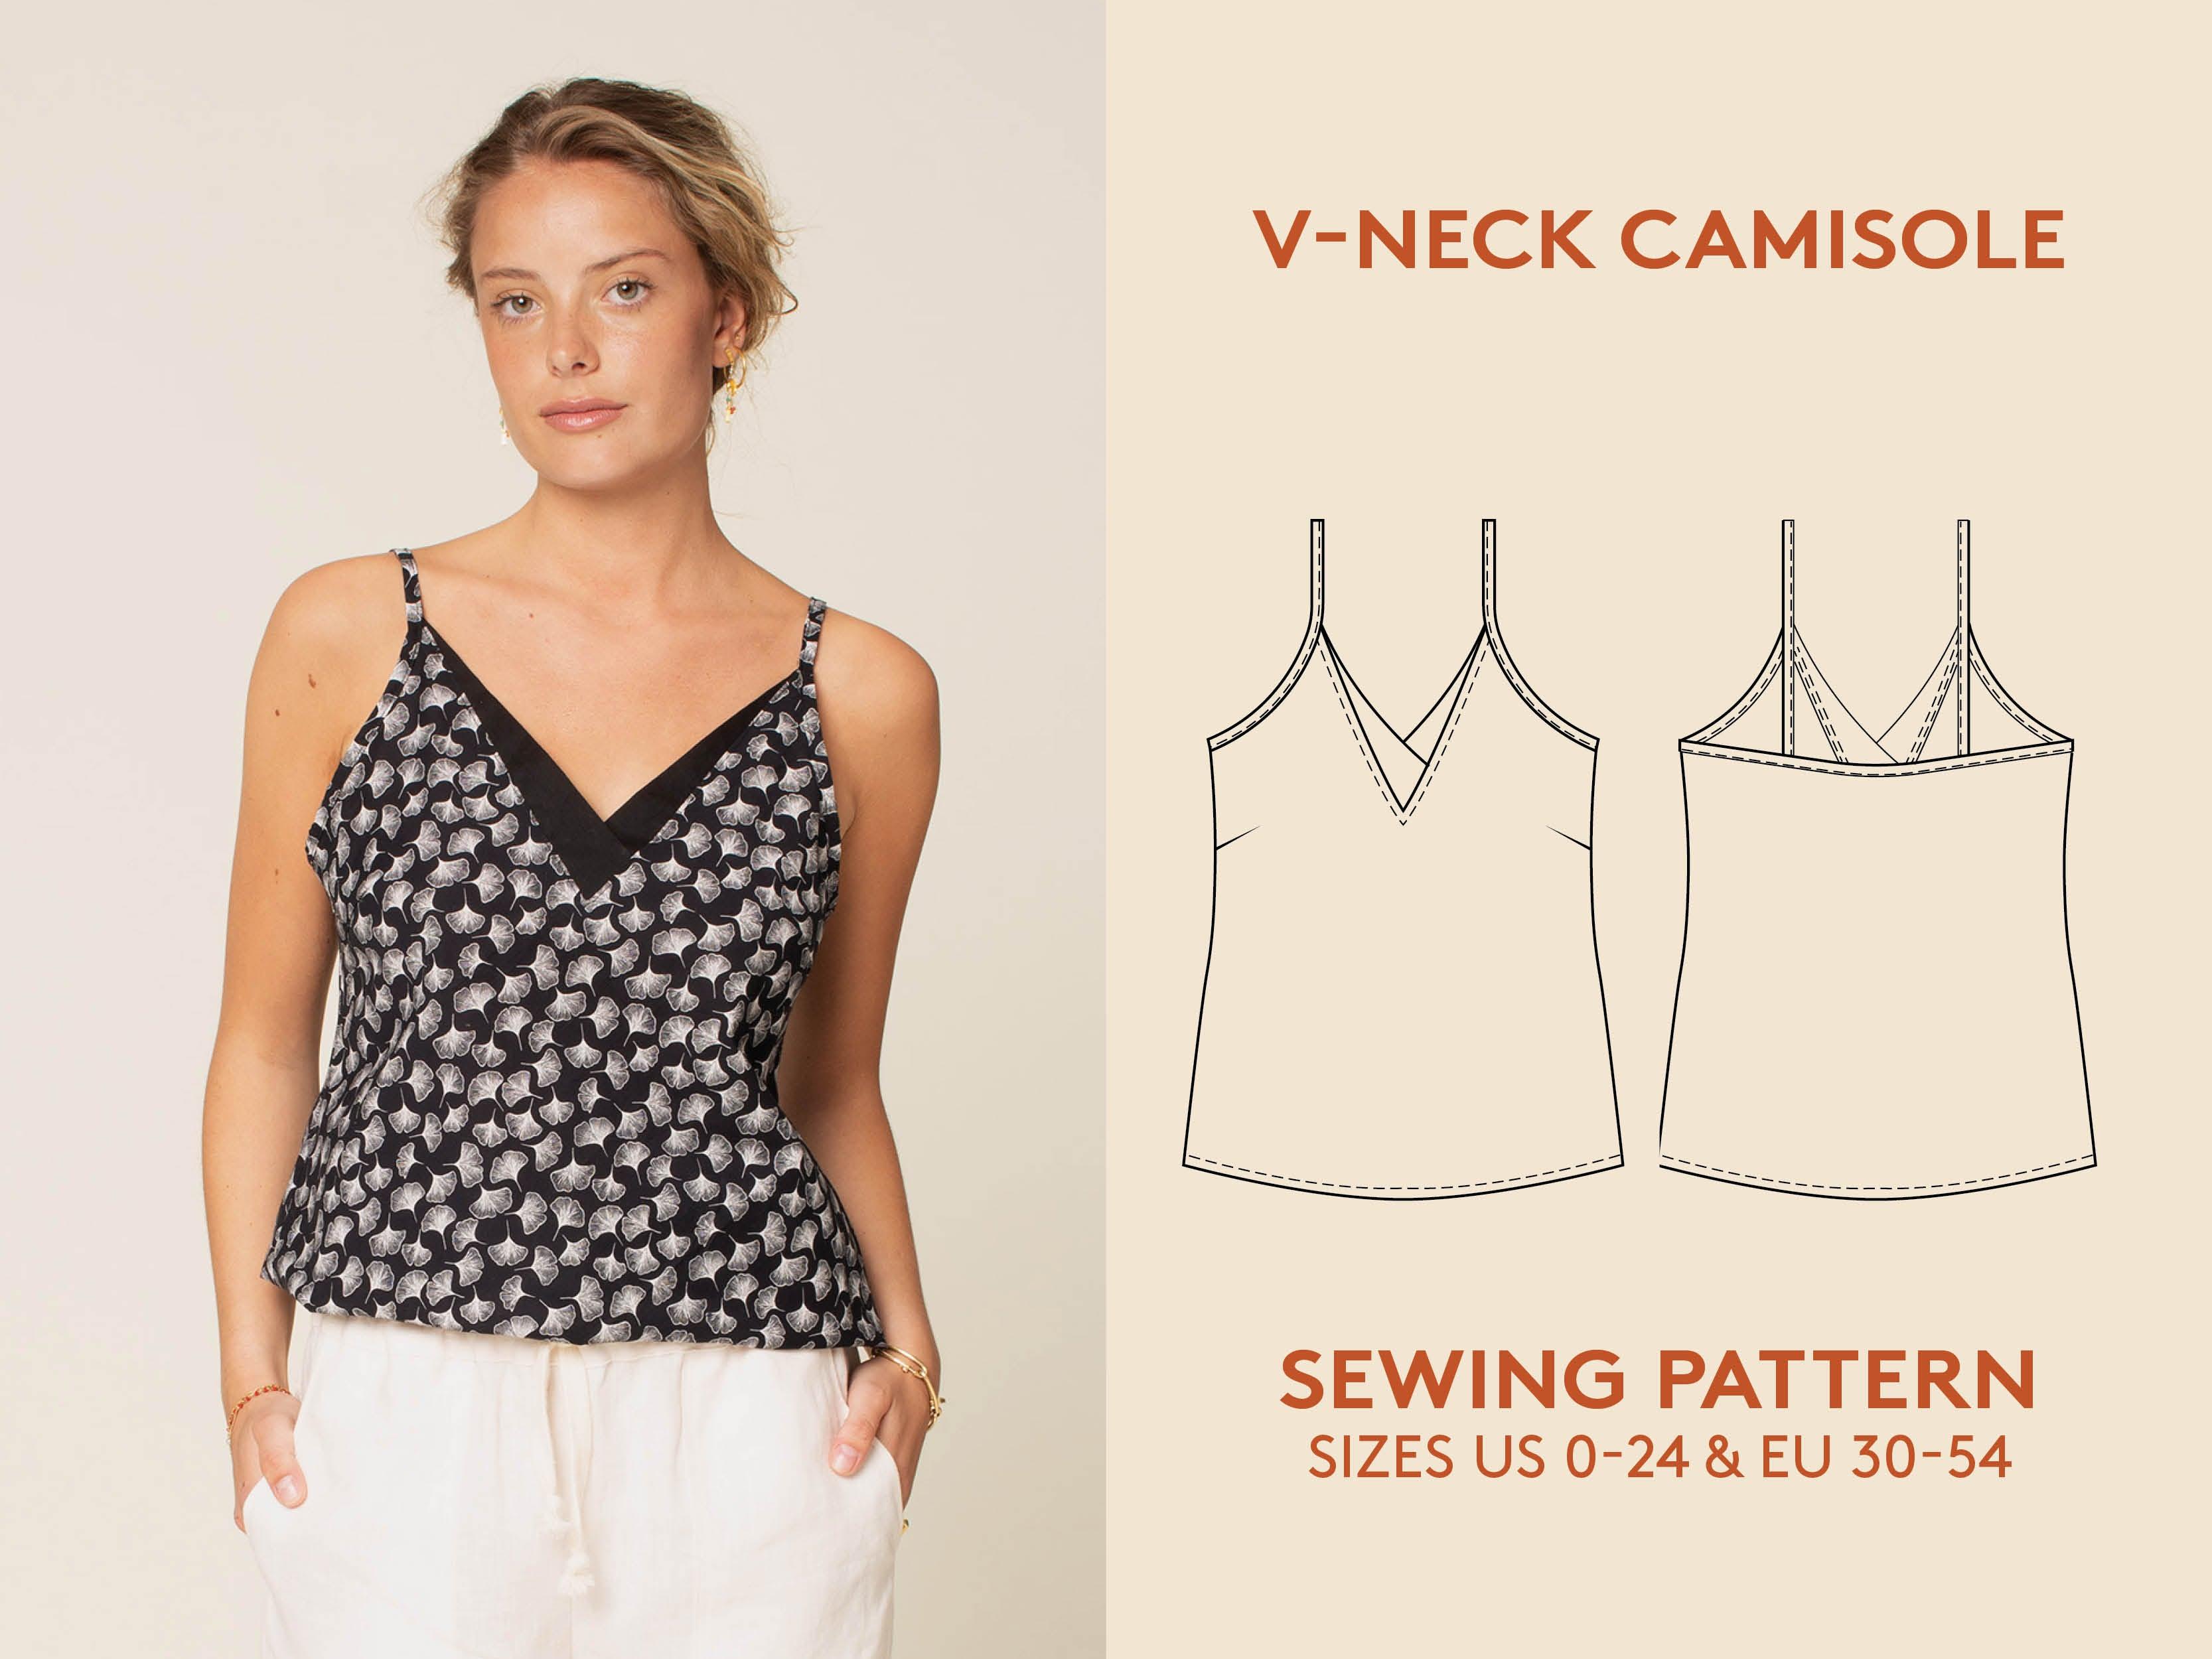 Scoop Neck Cami Top PDF Sewing Pattern Slip Shirt with